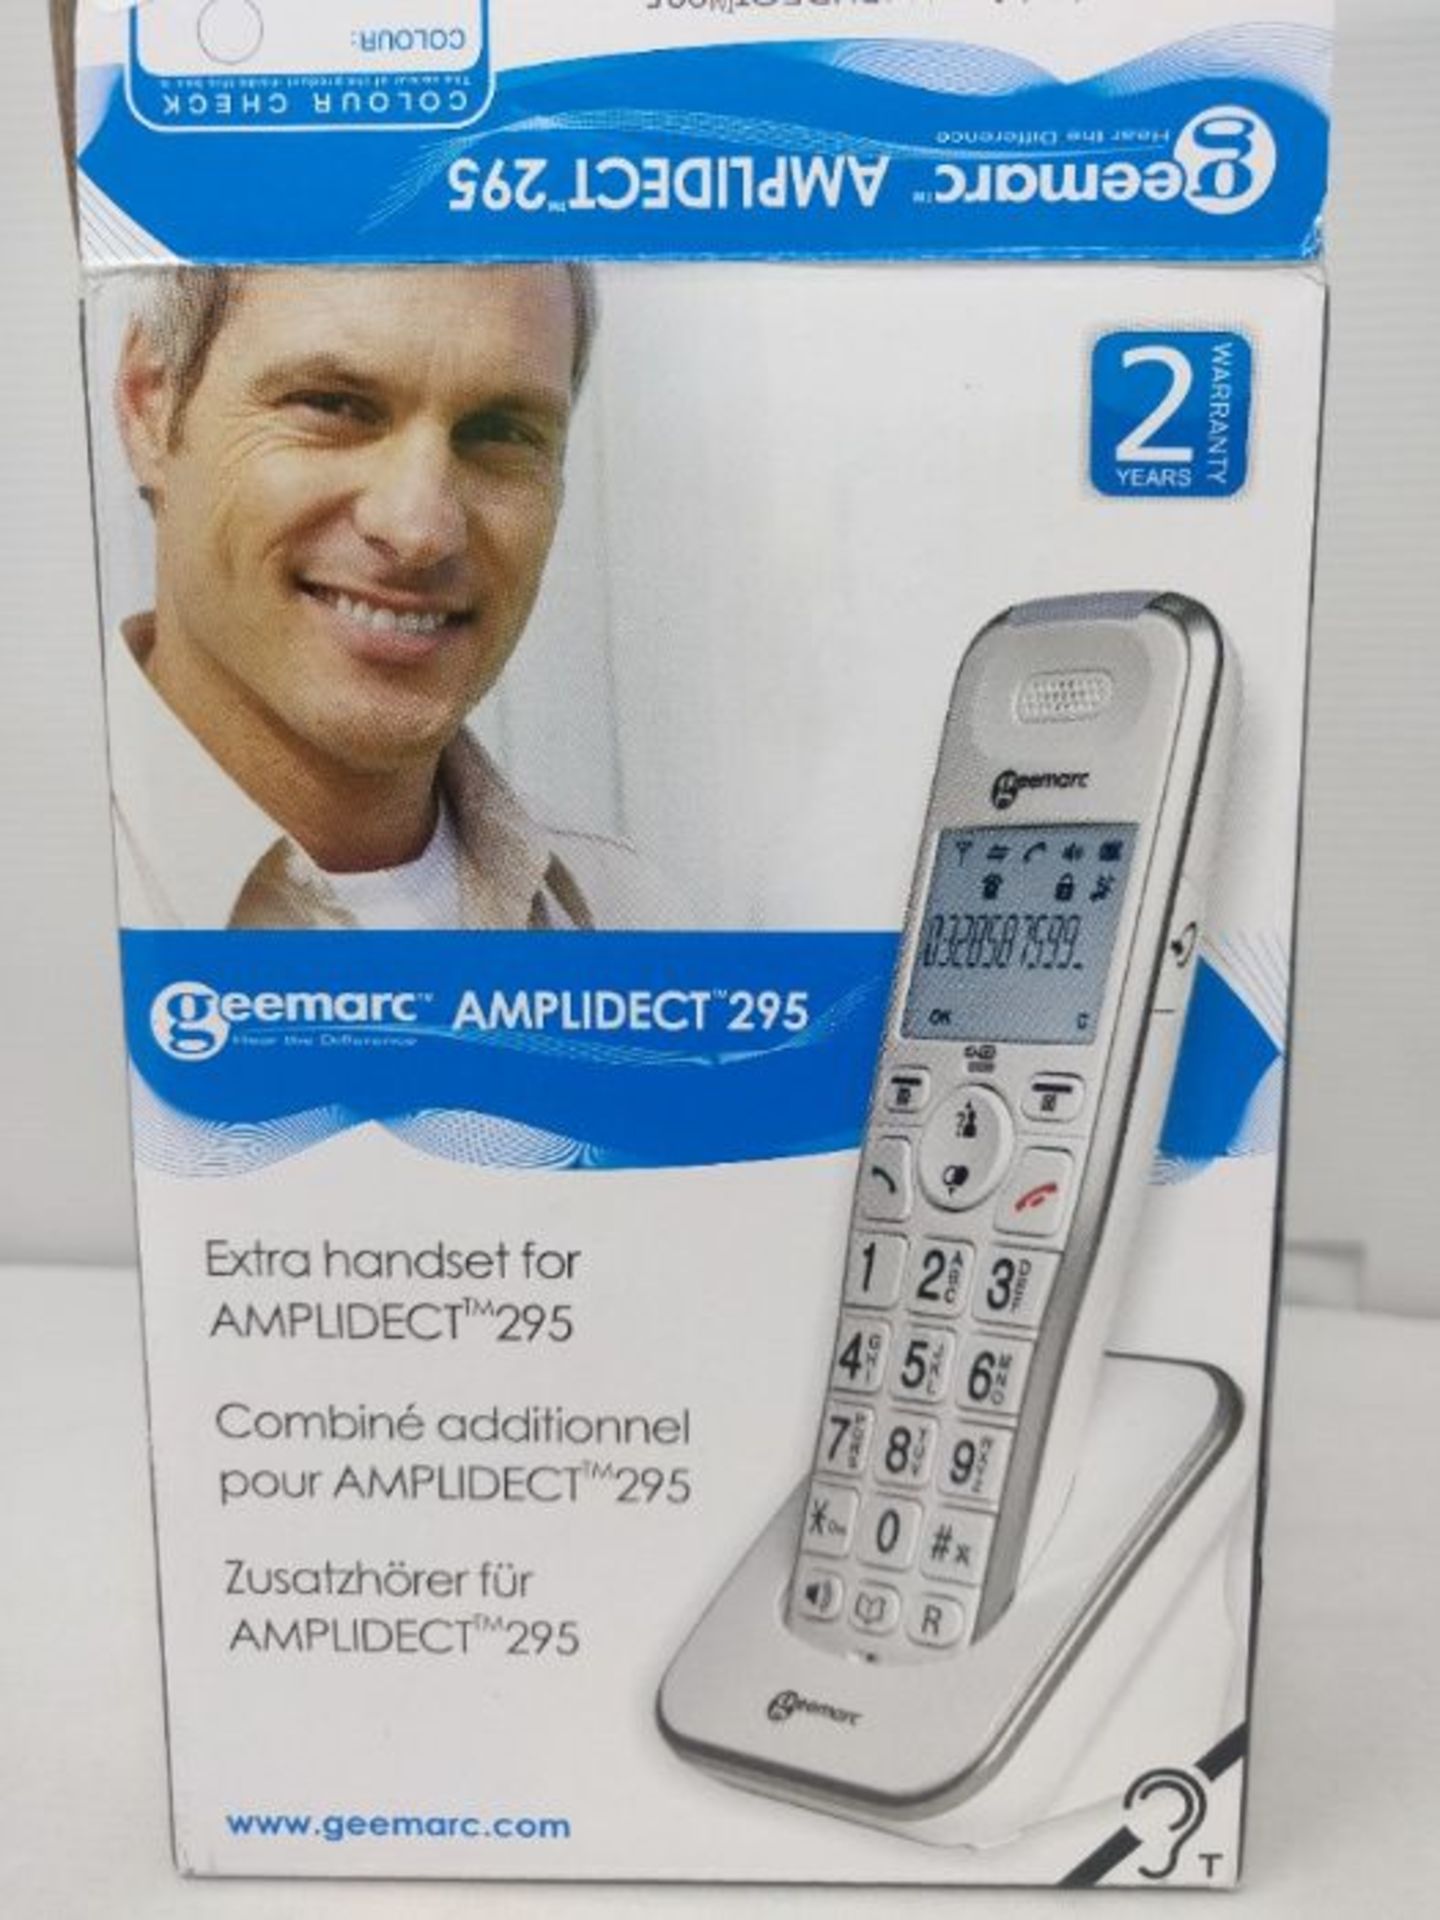 Geemarc AmpliDECT 295 - Amplified Additional Handset, Base Station Required for Amplid - Image 2 of 3